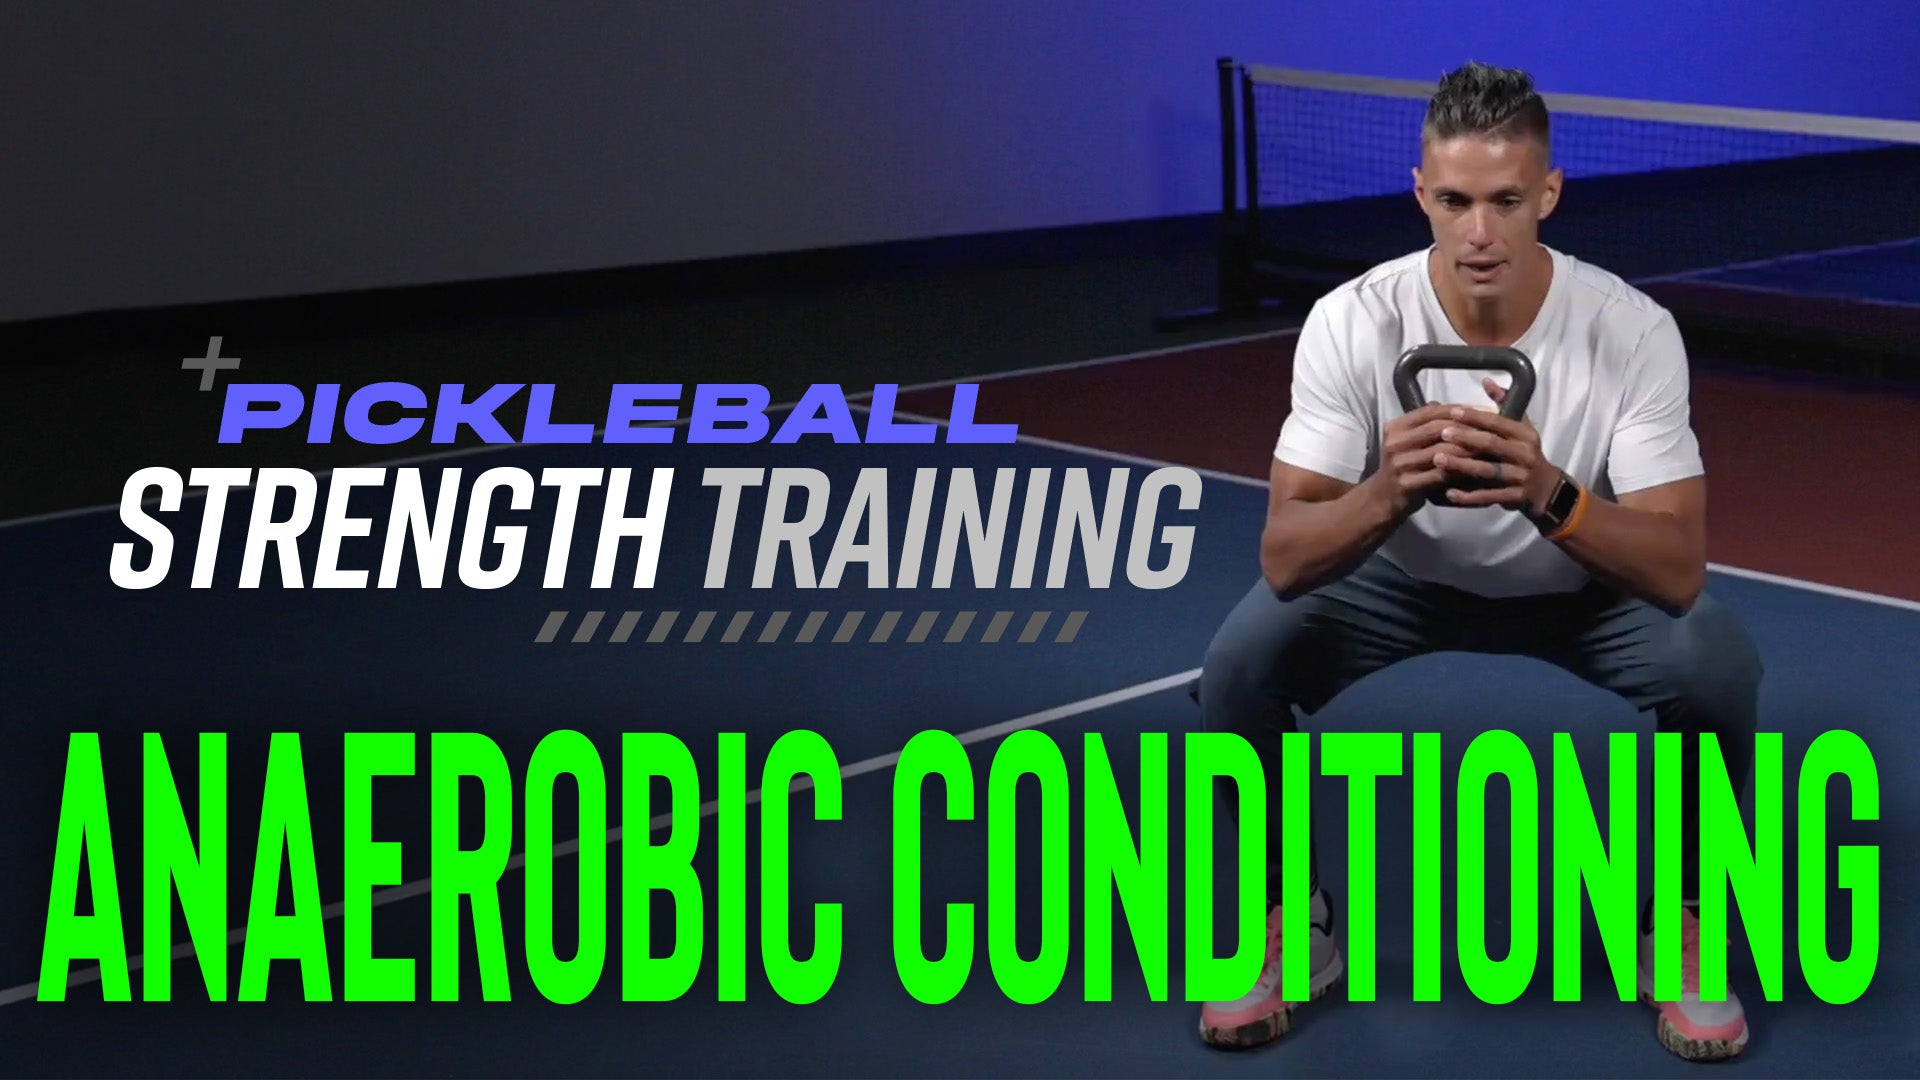 Pickleball strength training coach Connor Derickson gives tips for improving your anaerobic system